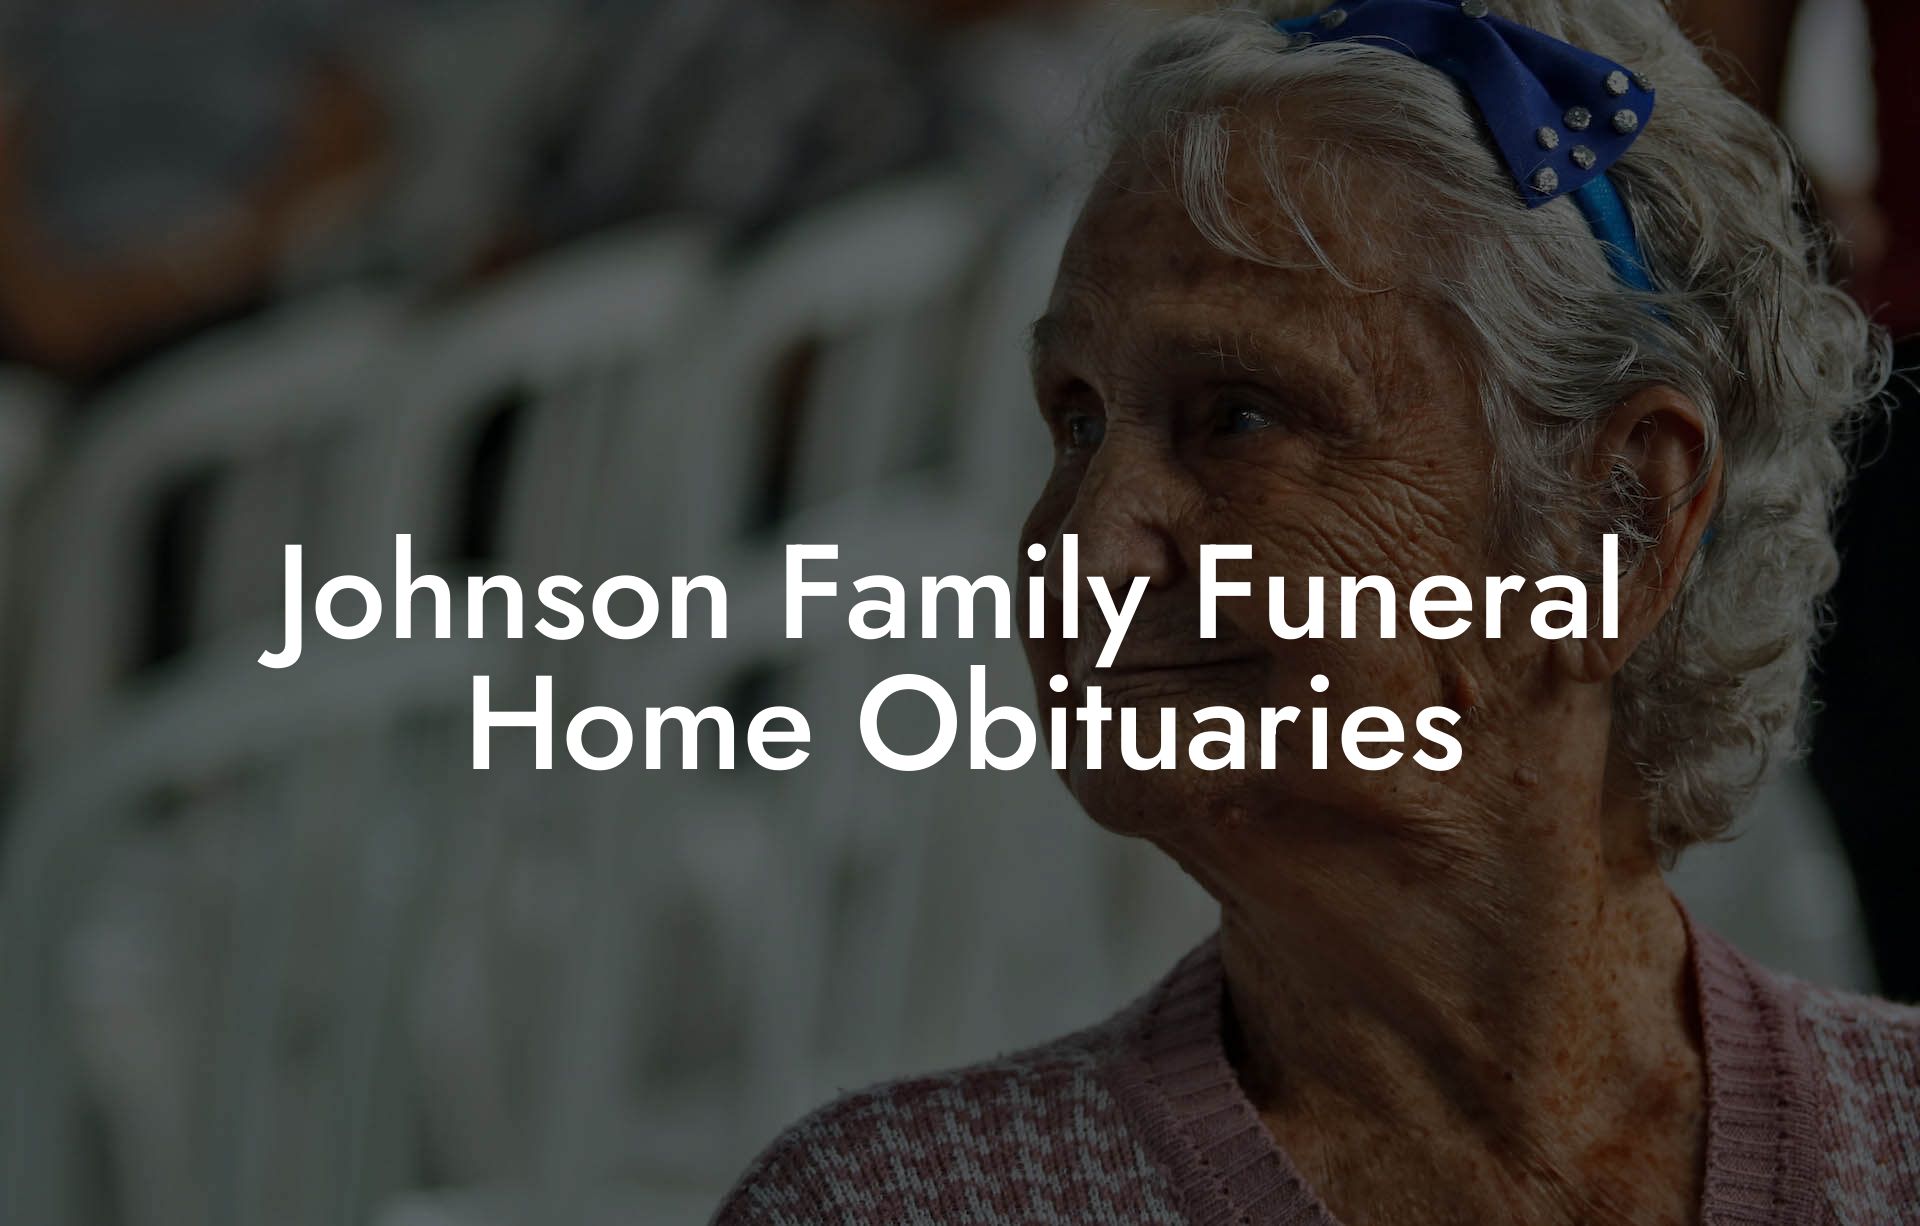 Johnson Family Funeral Home Obituaries